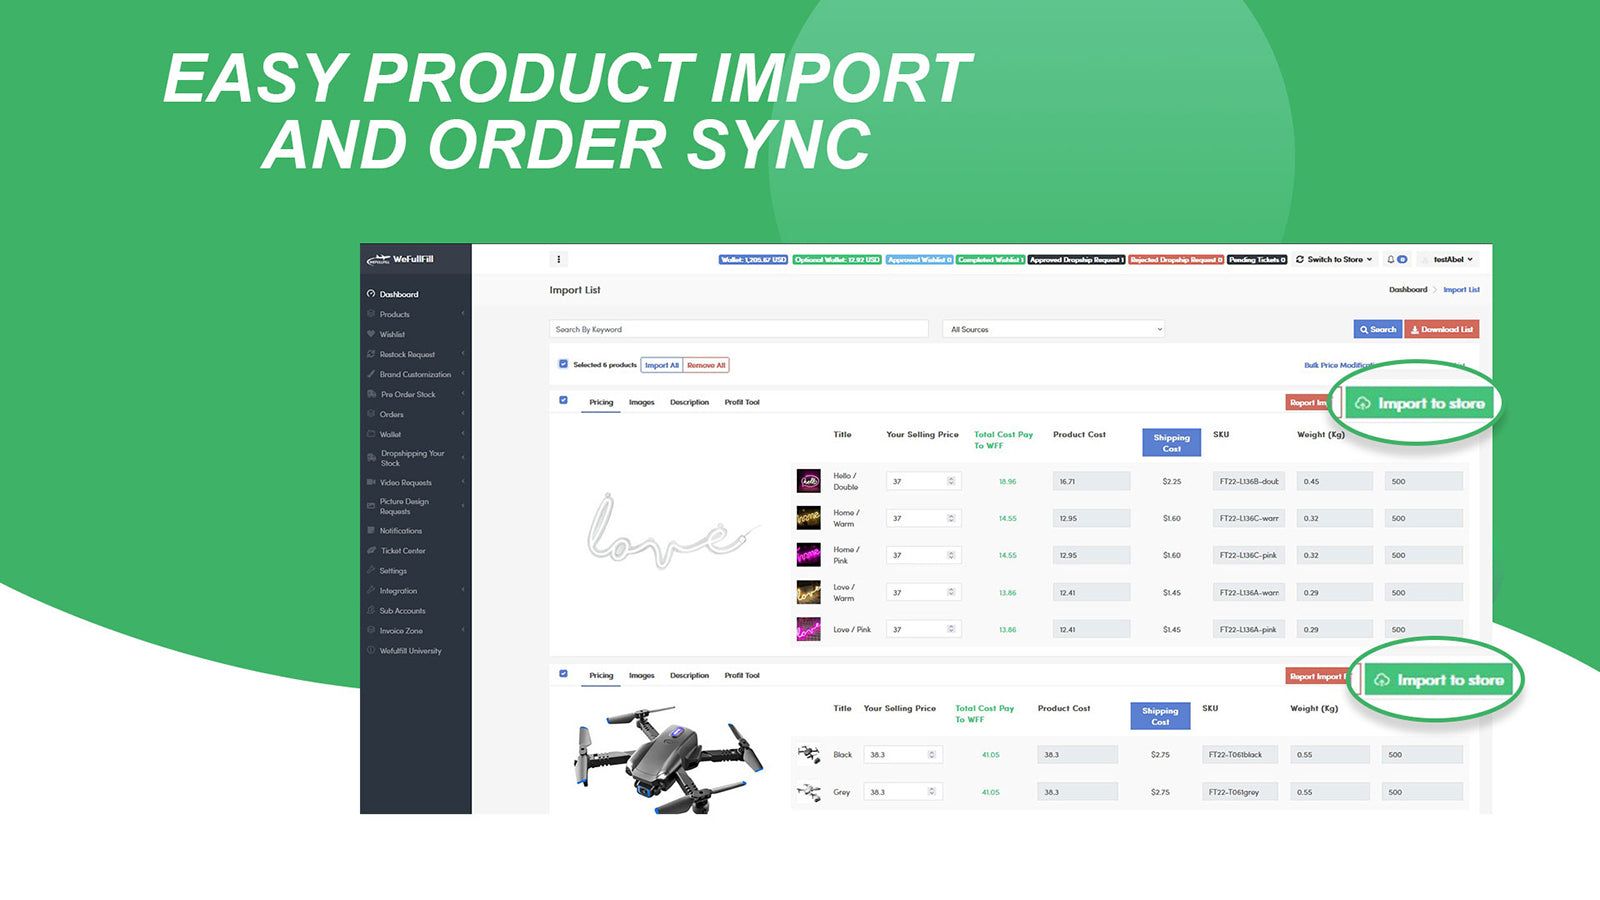 Easy Product Import and Order Sync